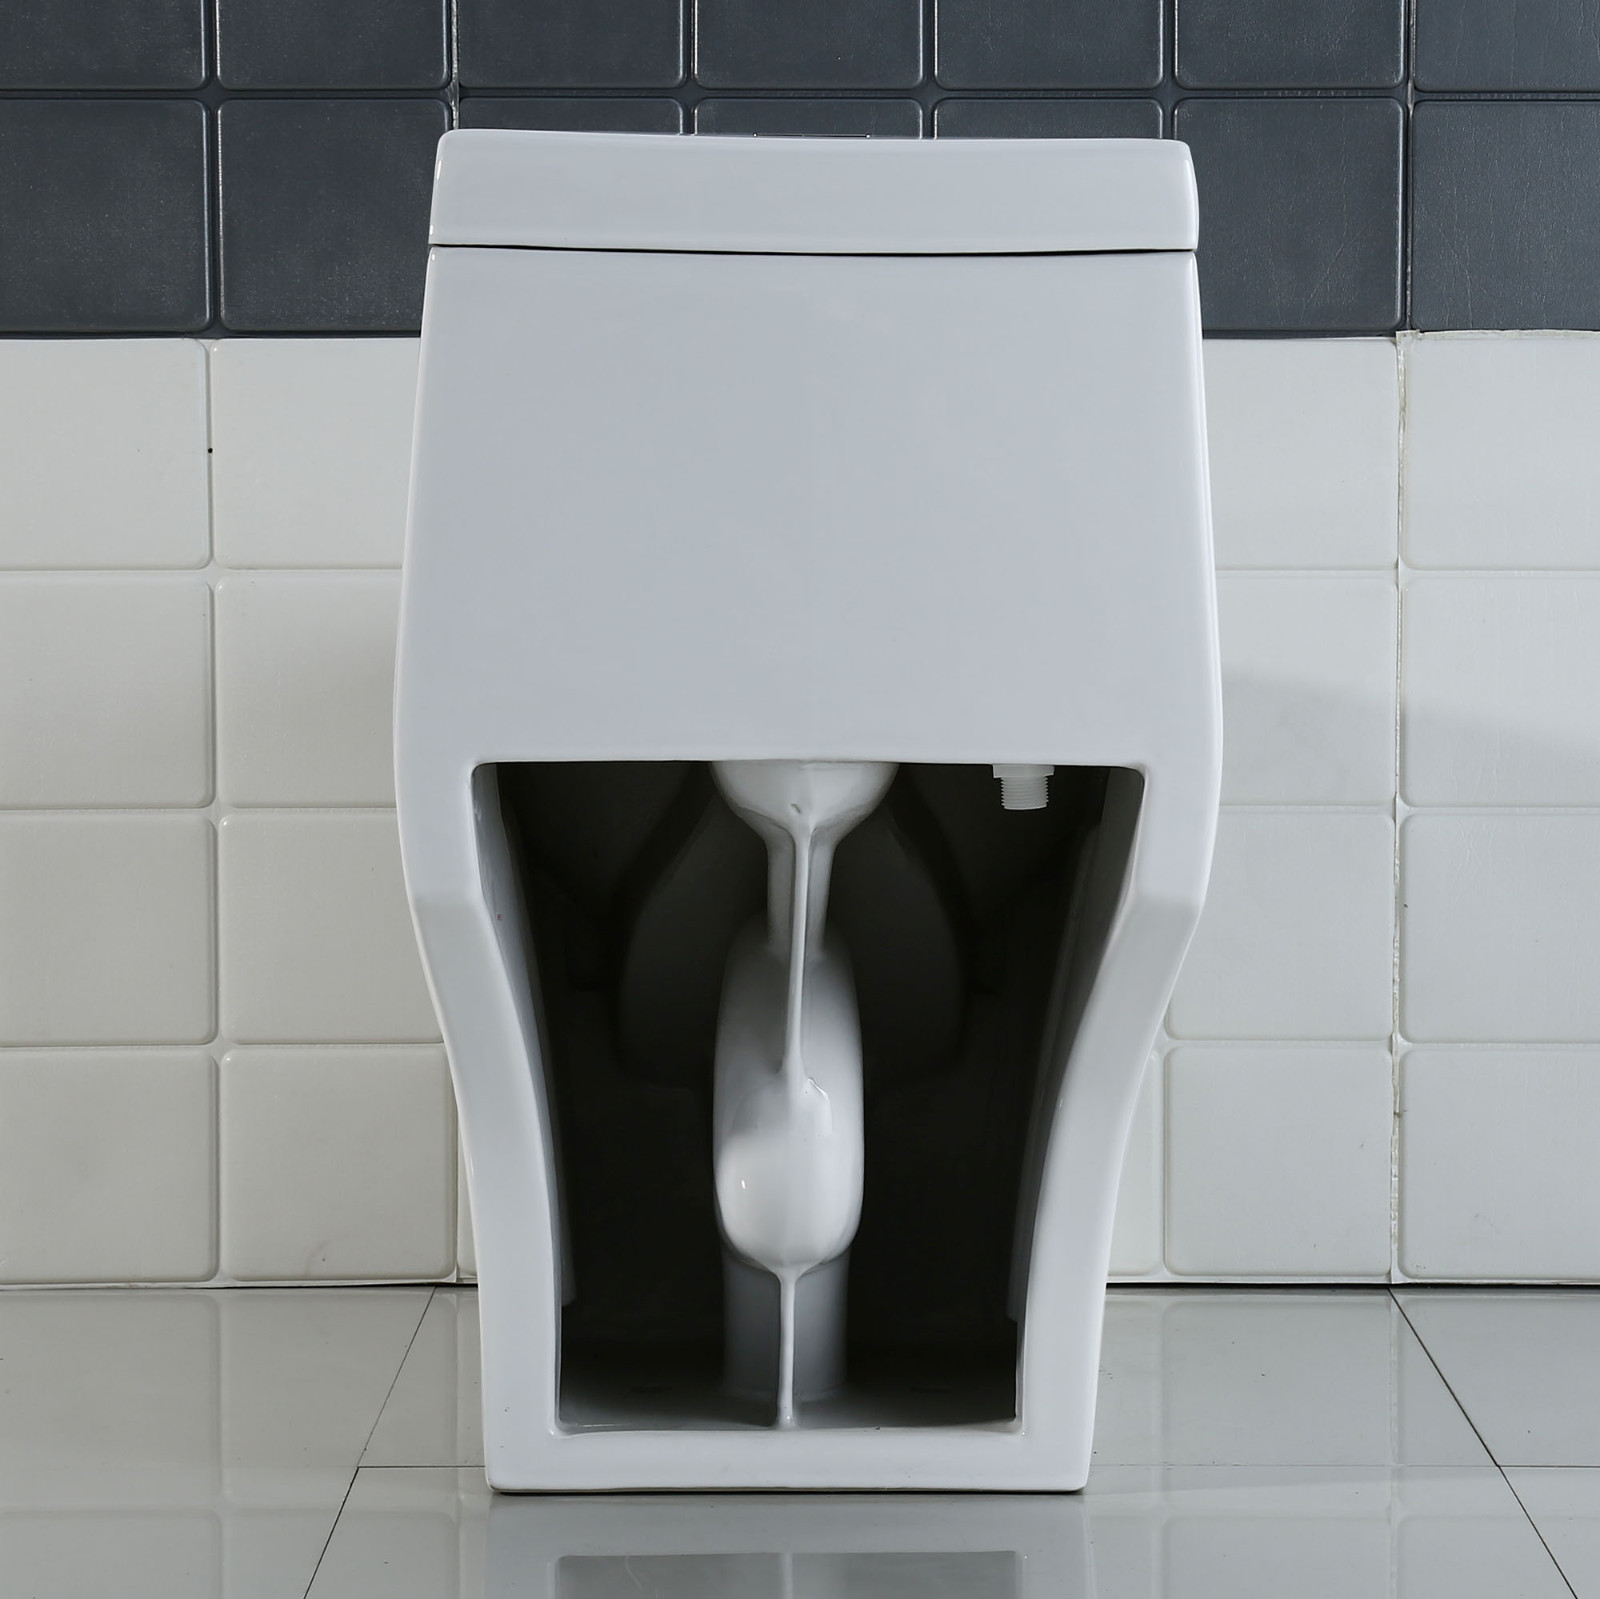  WOODBRIDGE T-0019, Dual Flush Elongated One Piece Toilet with Soft Closing Seat, Chair Height, Water Sense, High-Efficiency, T-0019 Rectangle Button_9923